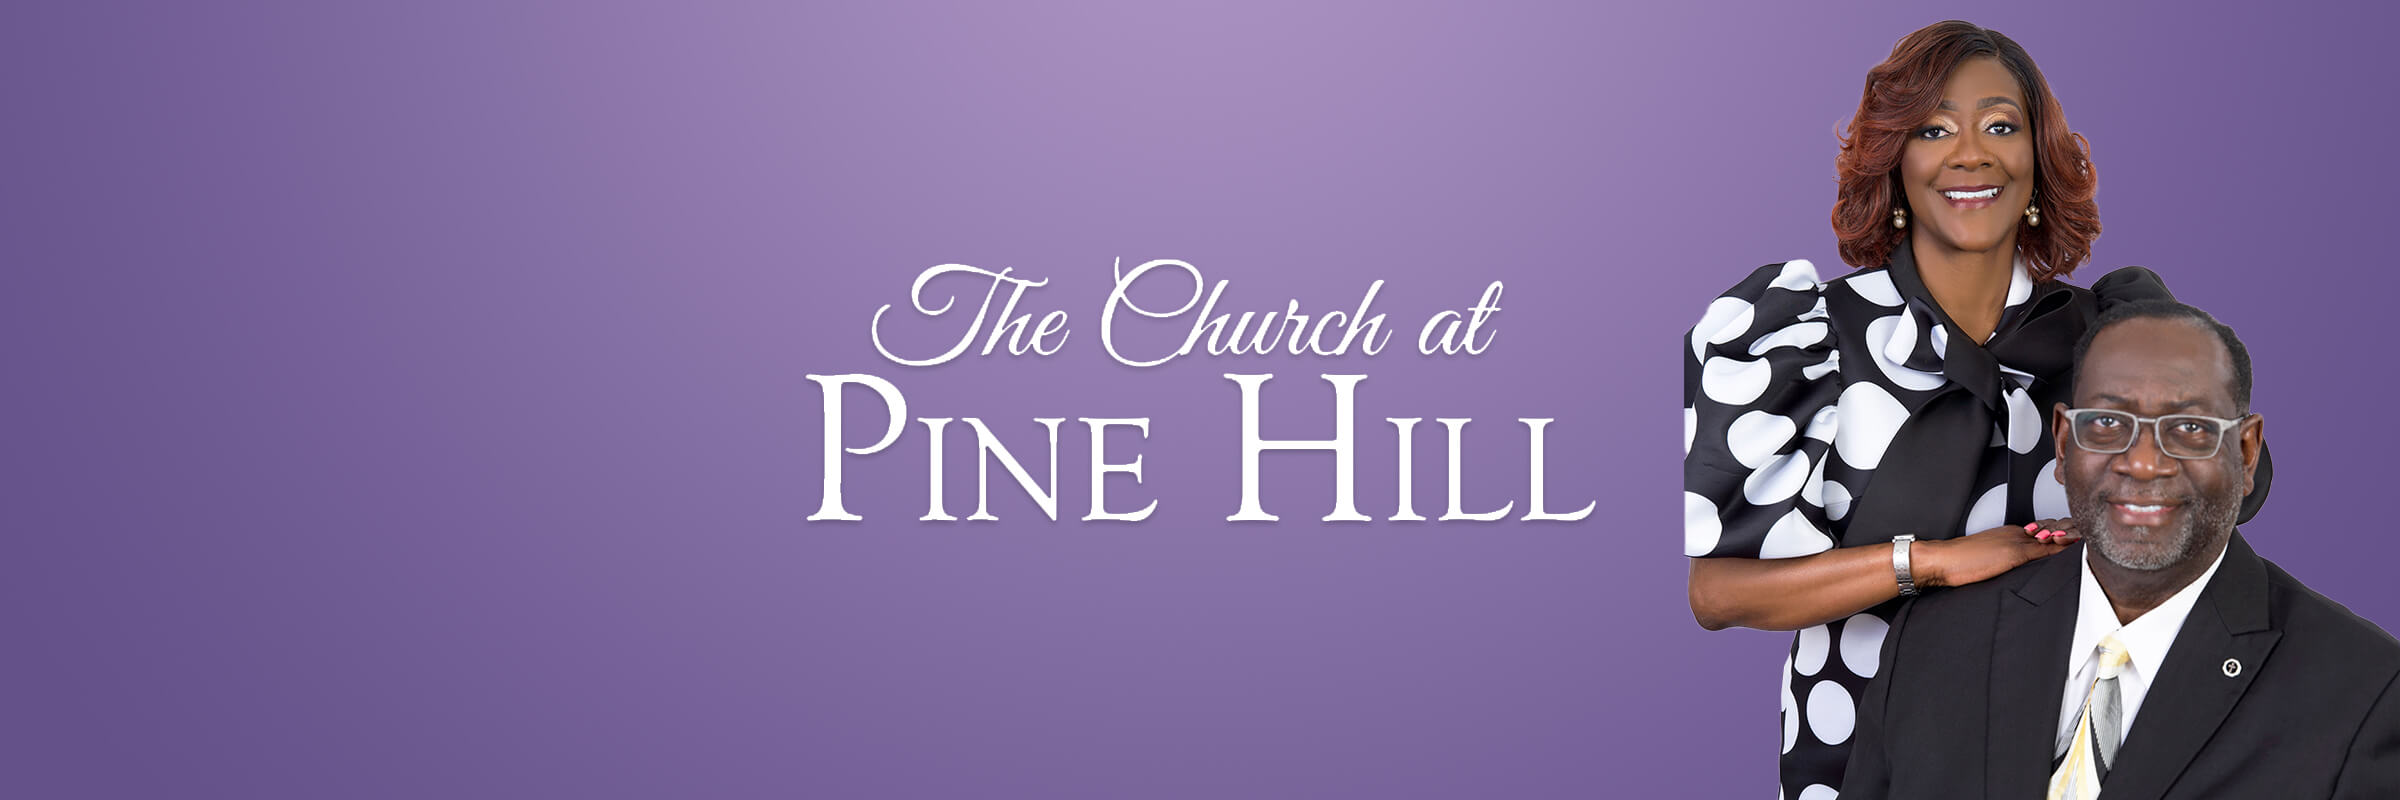 The Church at Pine Hill